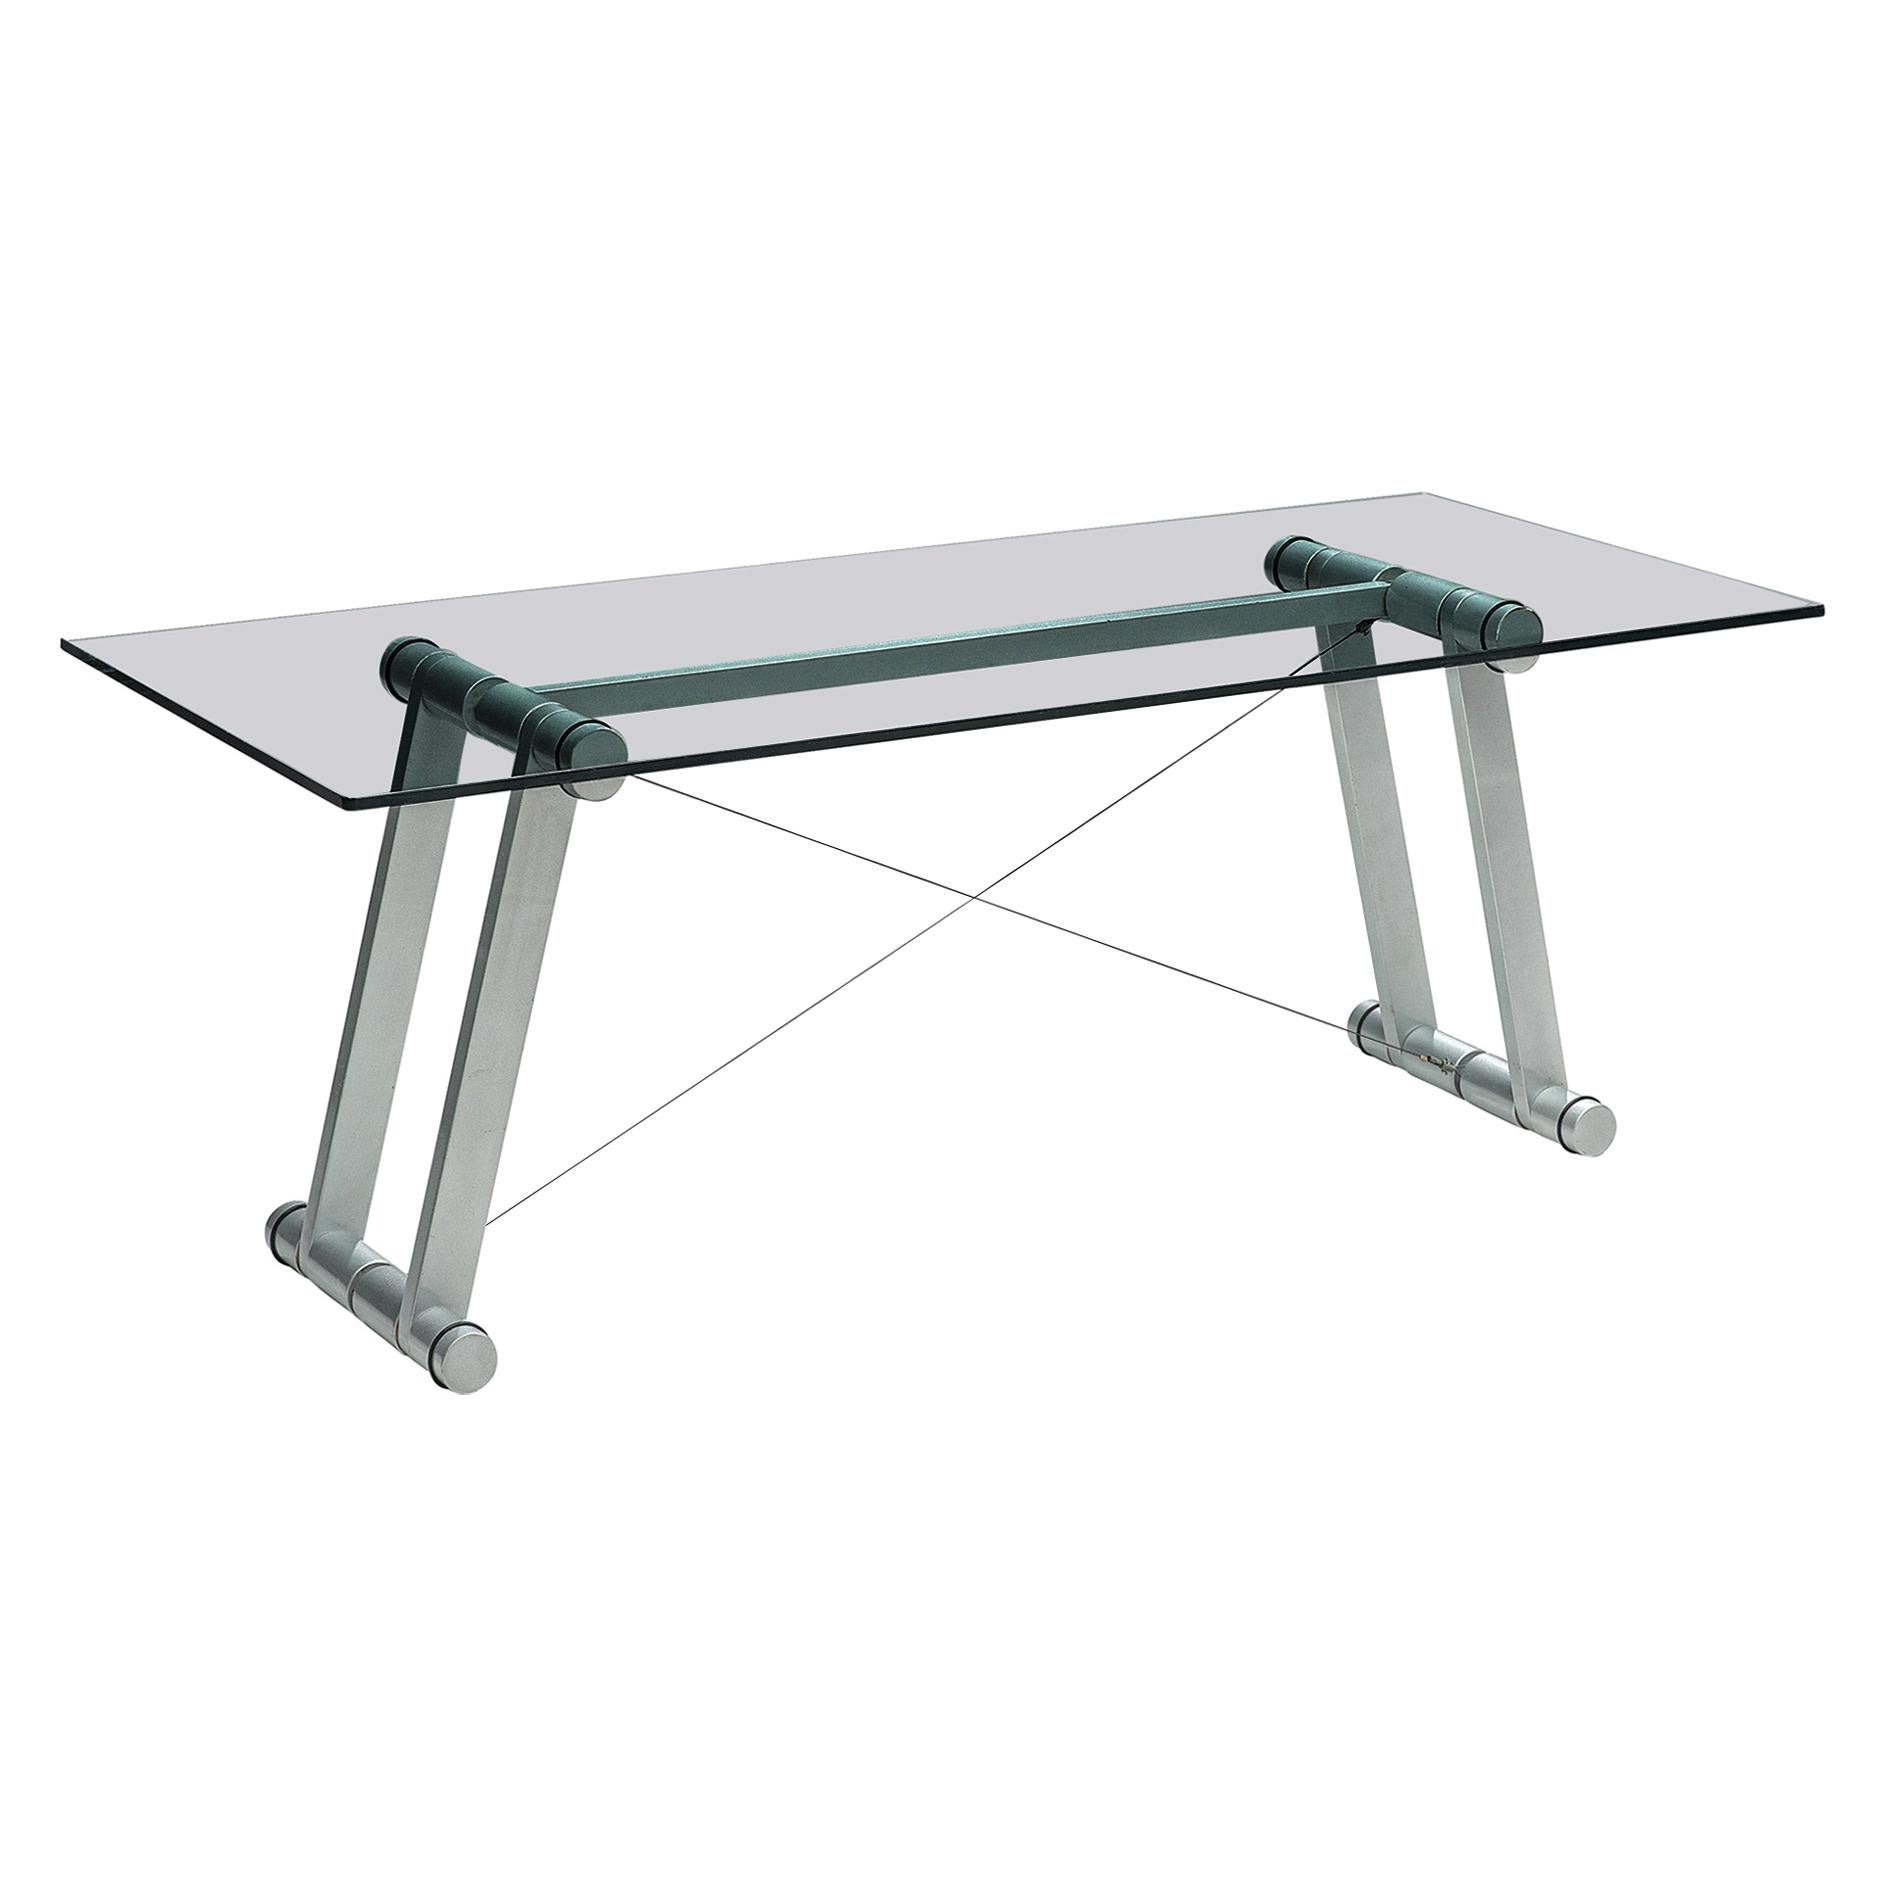 Superstudio Dining Table with Glass Top and Metallic Base